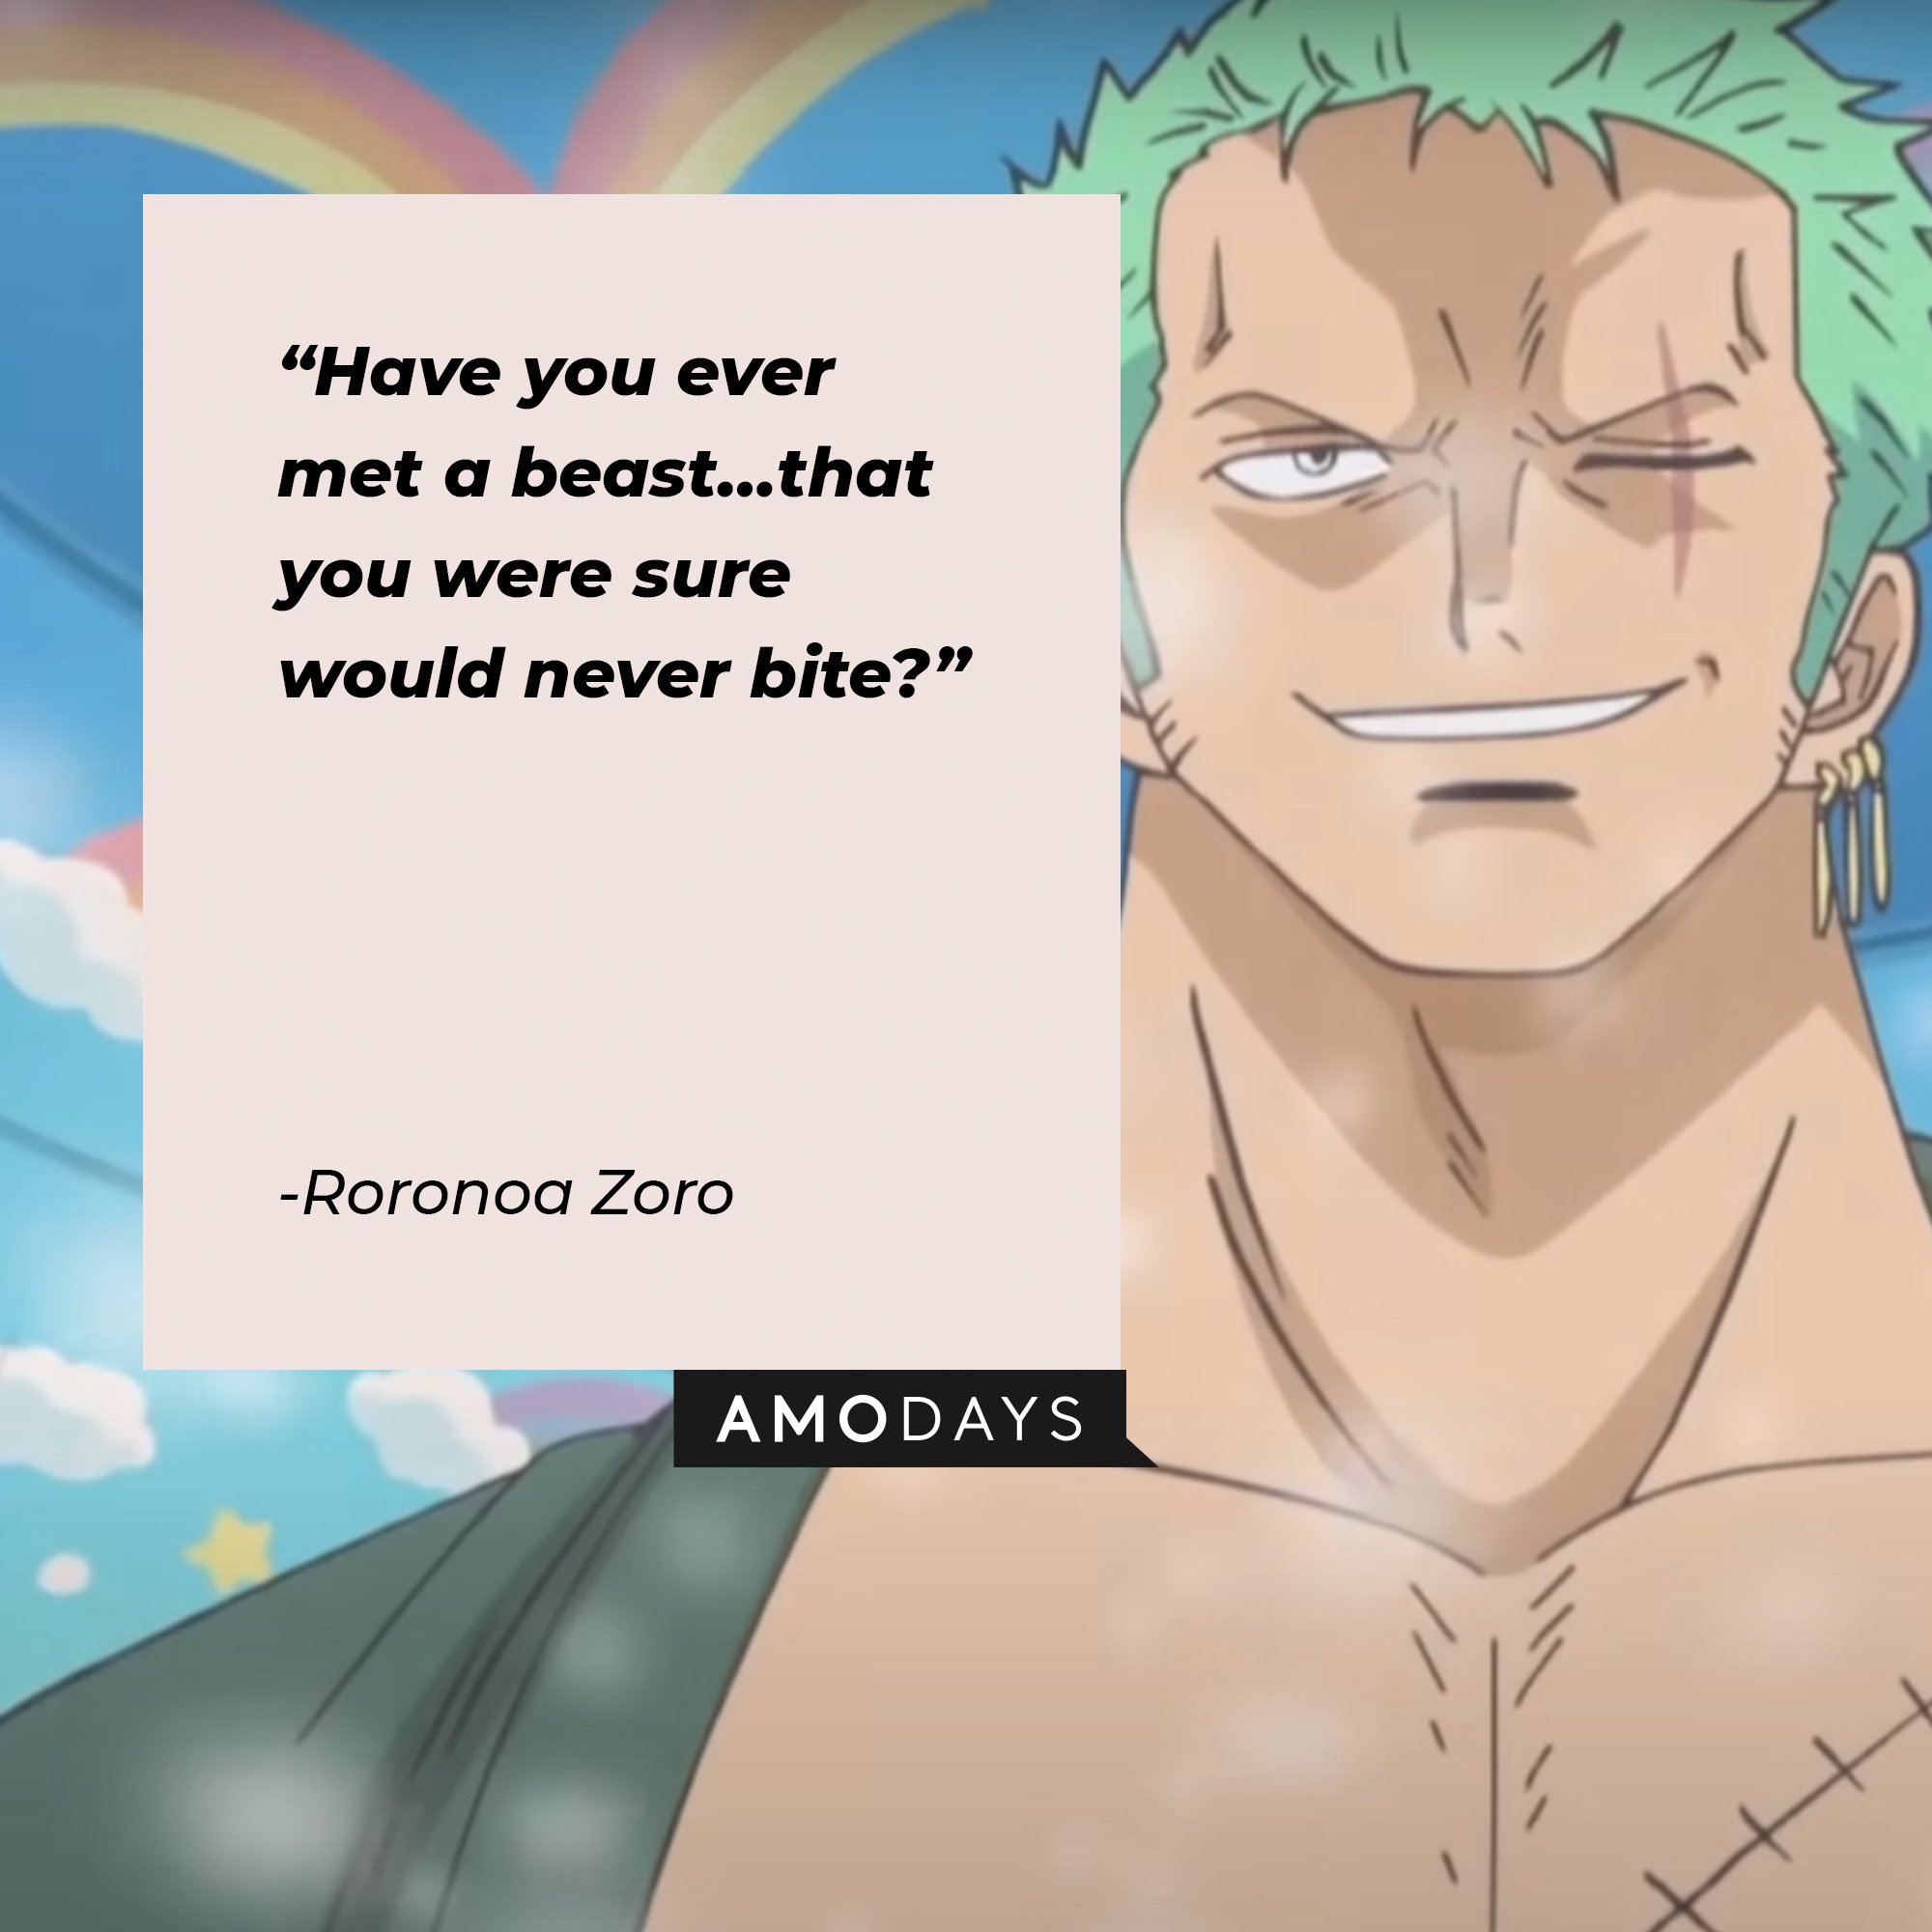 Roronoa Zoro’s quote: “Have you ever met a beast…that you were sure would never bite?" | Image: AmoDays